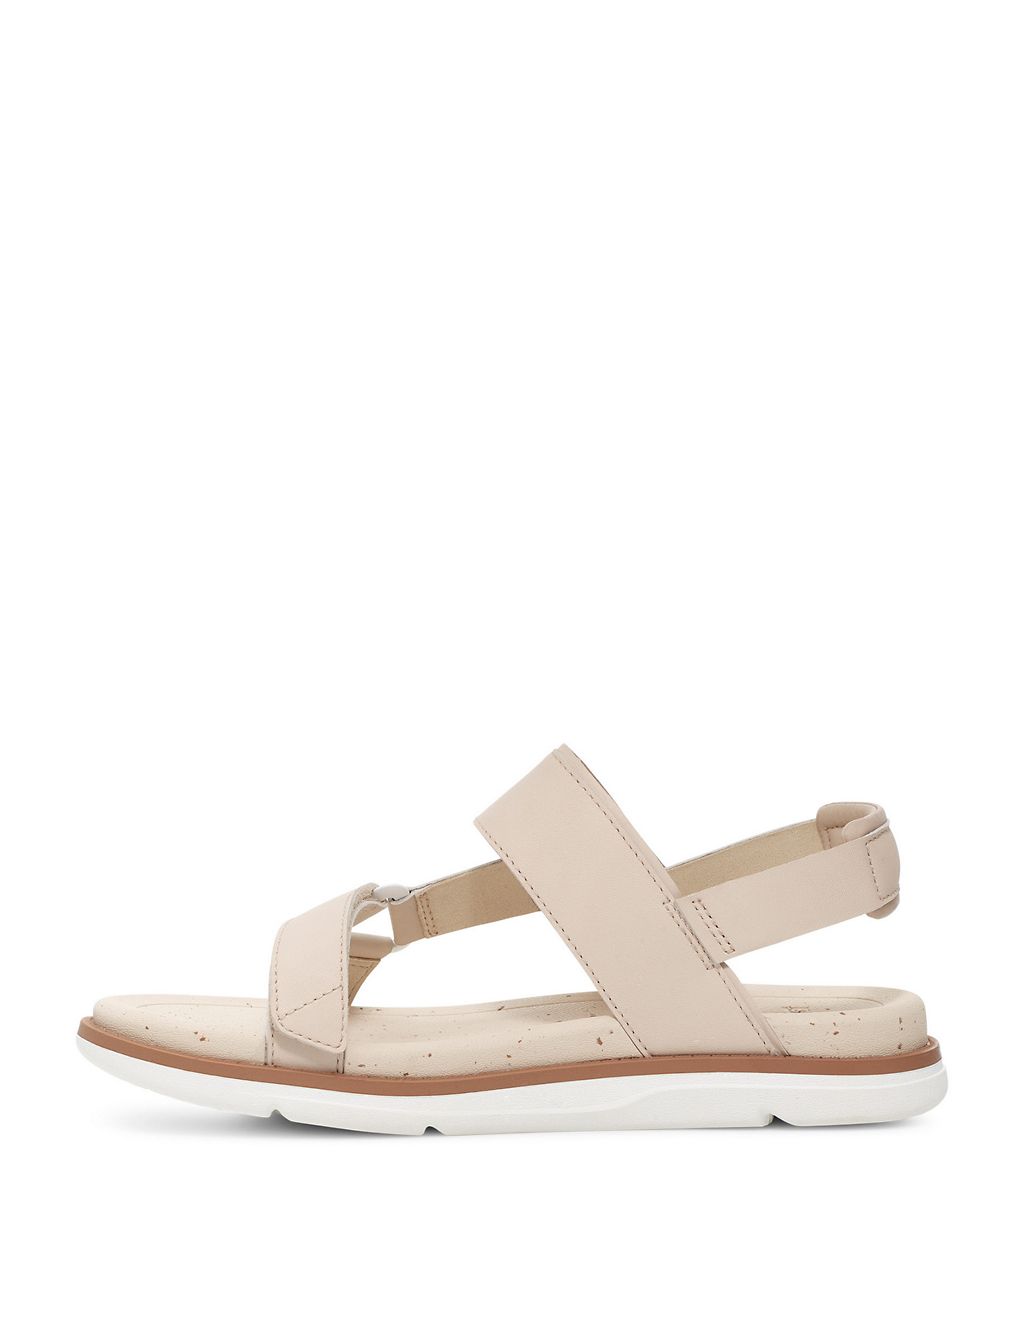 Madera Leather Flat Slingback Sandals 2 of 6